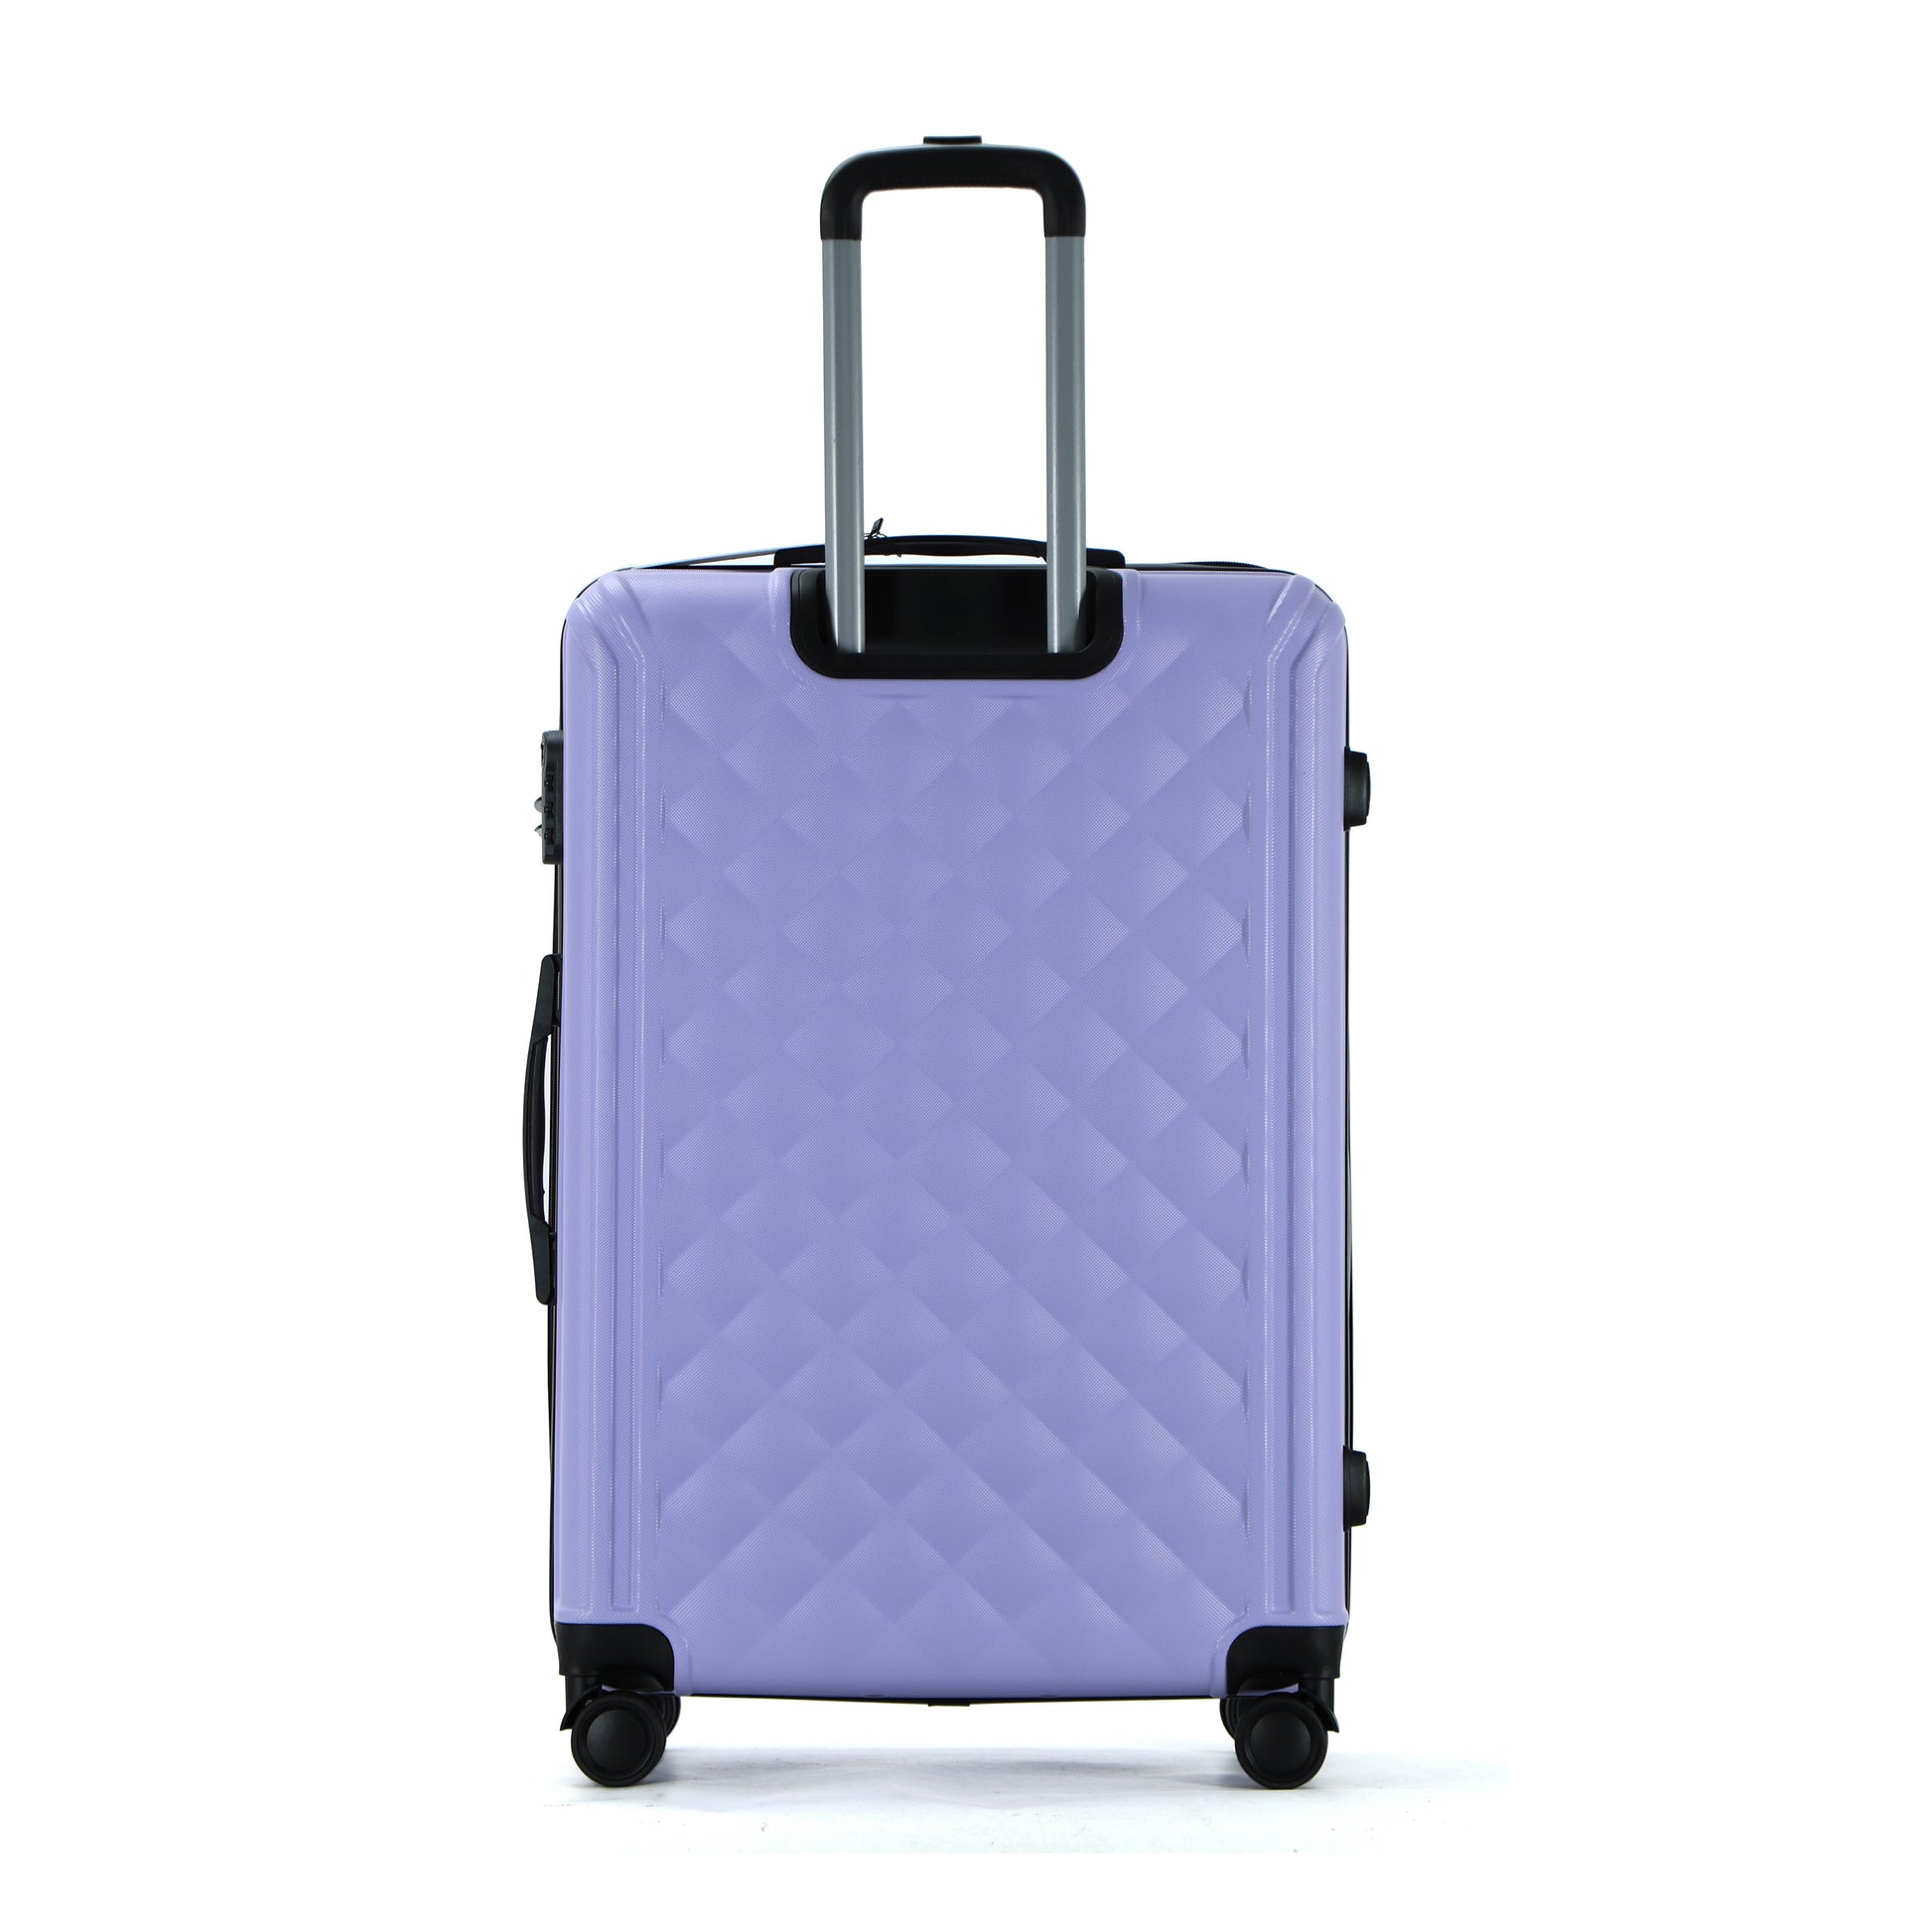 Easy Luggage Tabby Quilted 3 Piece Hard Shell Suitcases 360° Wheels Light Purple